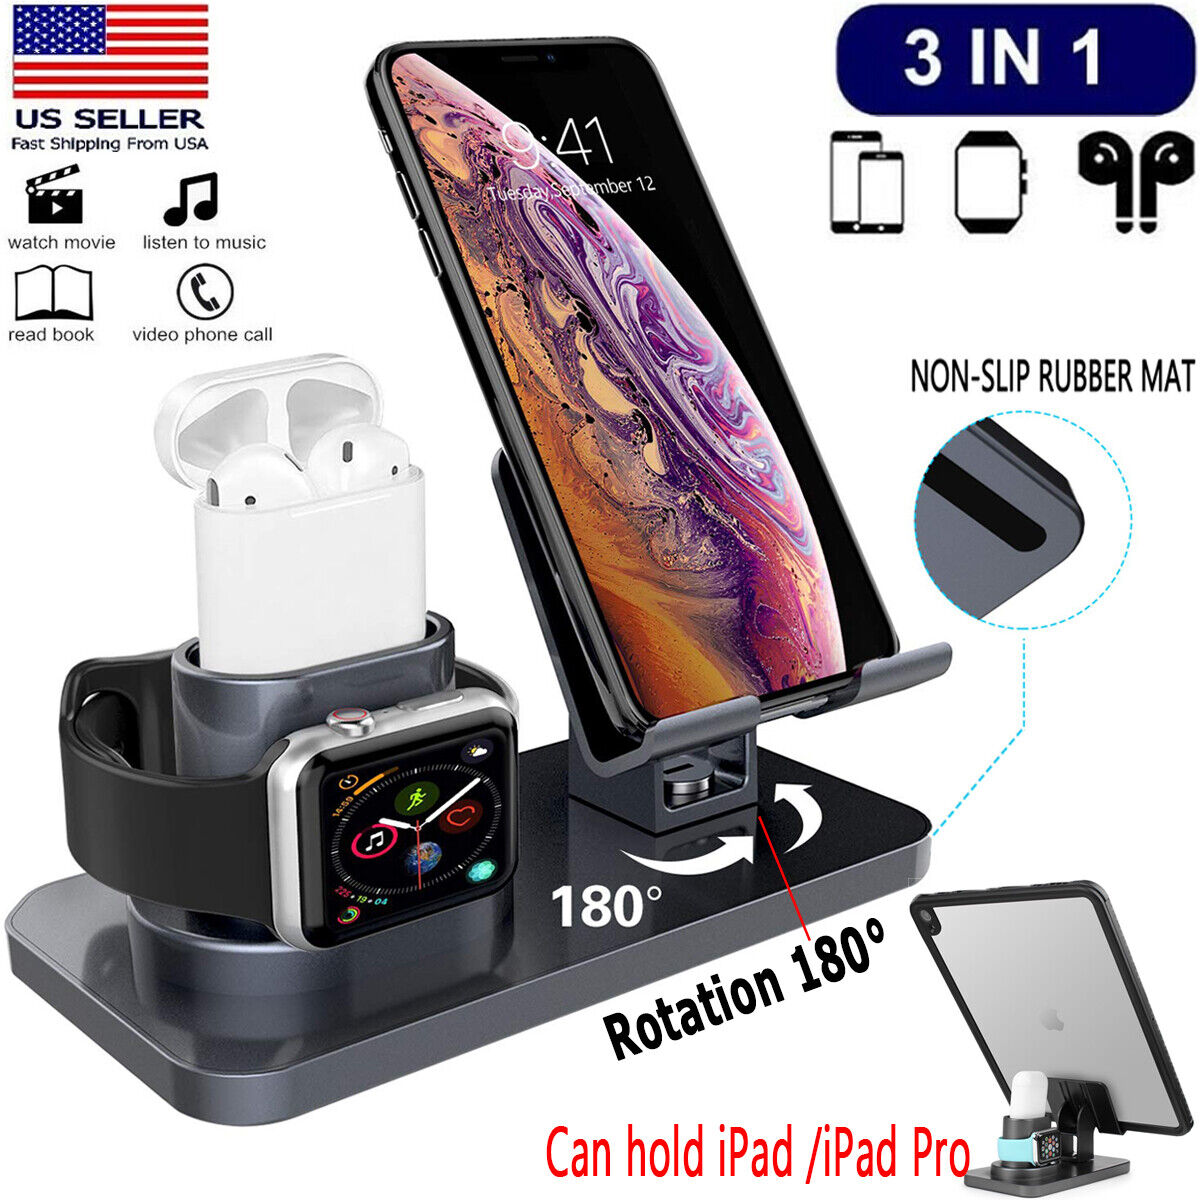 3 in 1 Charging Dock Station Holder Stand For Apple Watch AirPods/iPhone 11/iPad Number of Ports 3 Design/Finish 3 in 1 - Click Image to Close